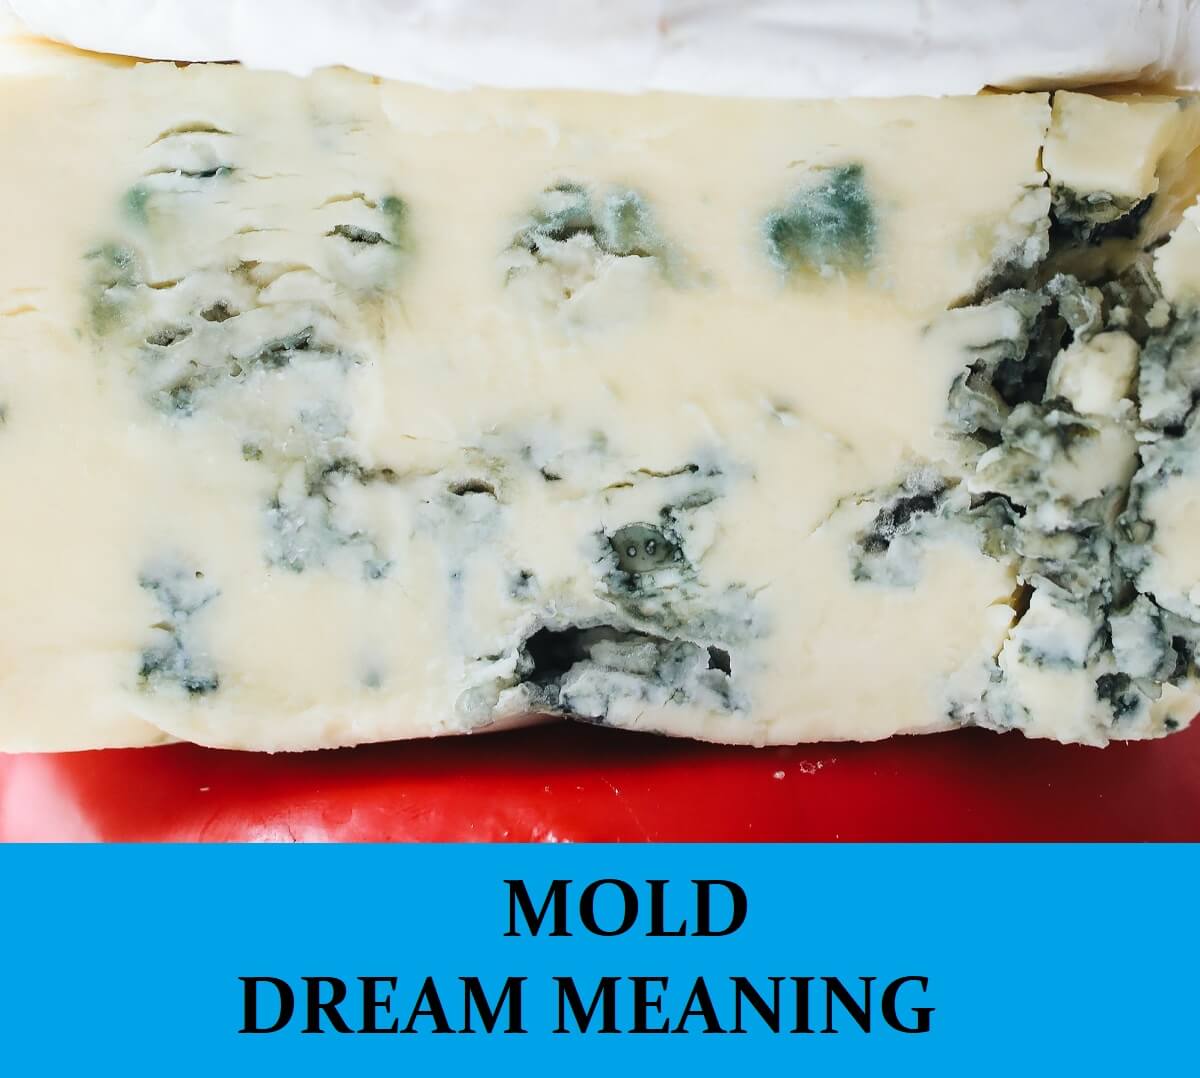 Mold Dream Meaning - Top 12 Dreams About Mold : Dream Meaning Net.